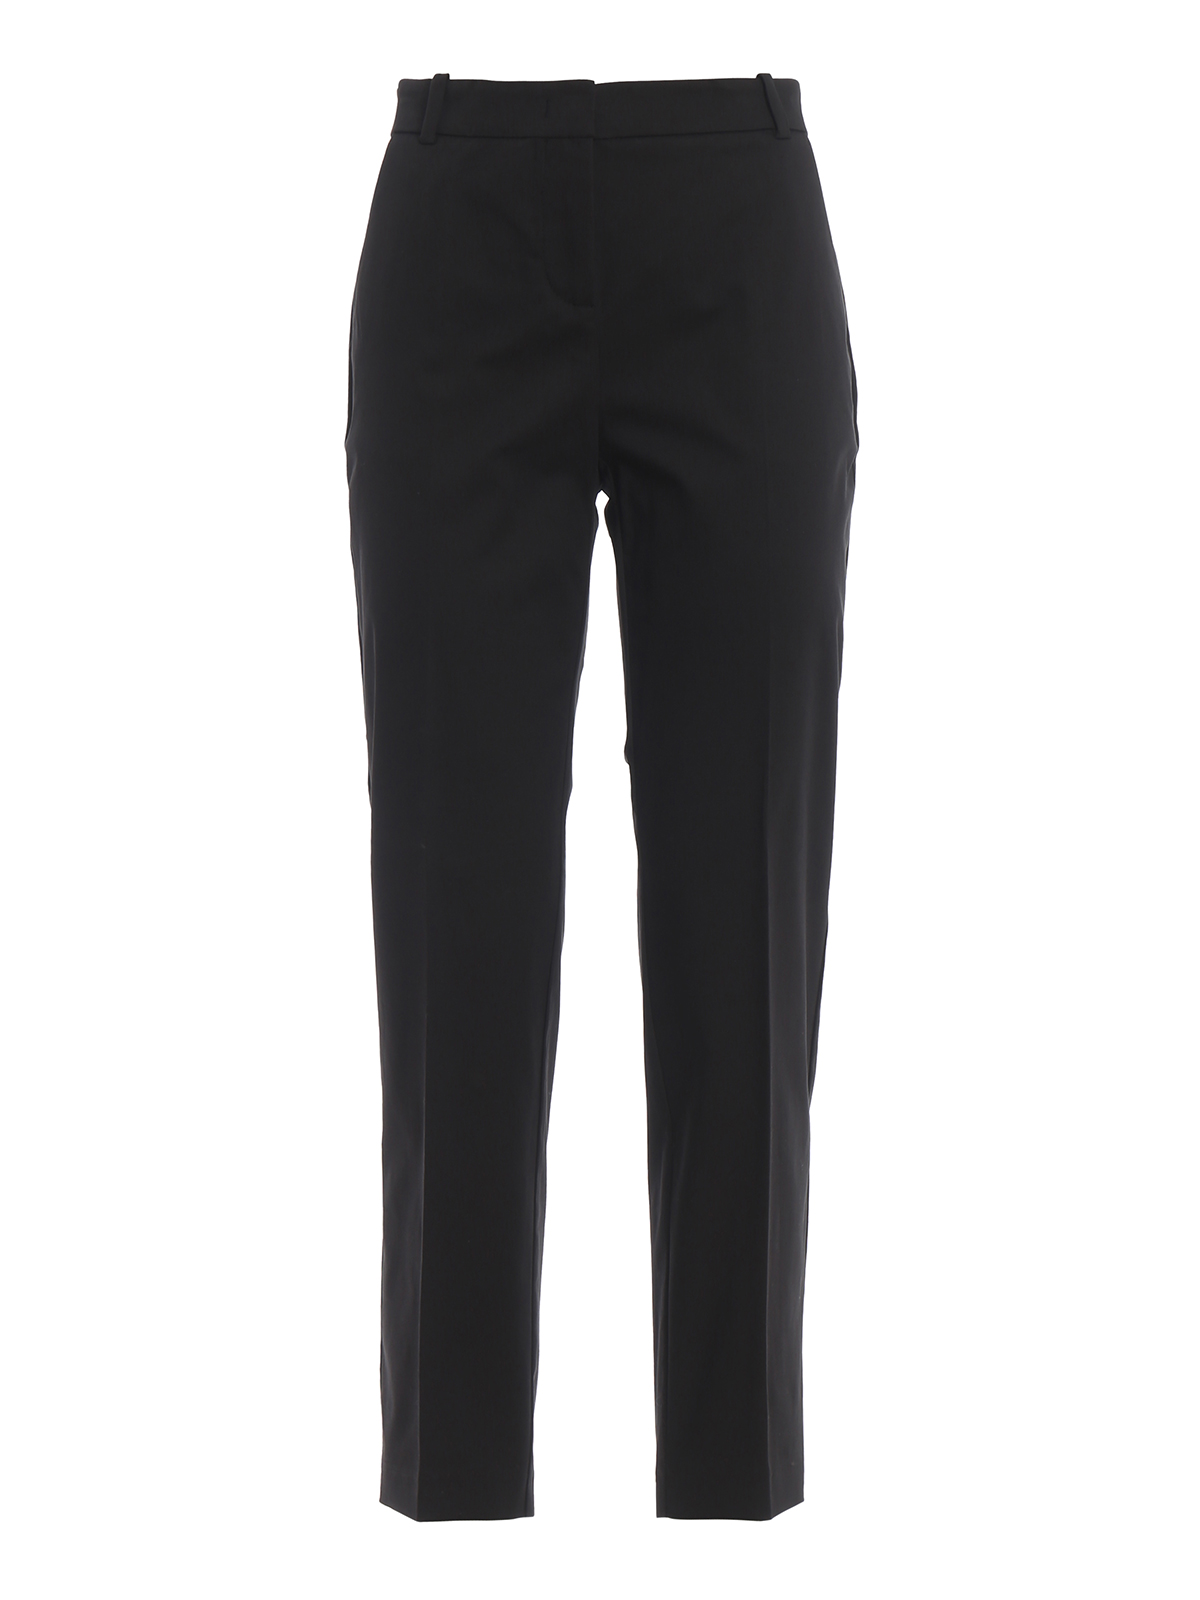 Buy Trendy Black Cotton Blend Trousers Women Girl Online In India At  Discounted Prices